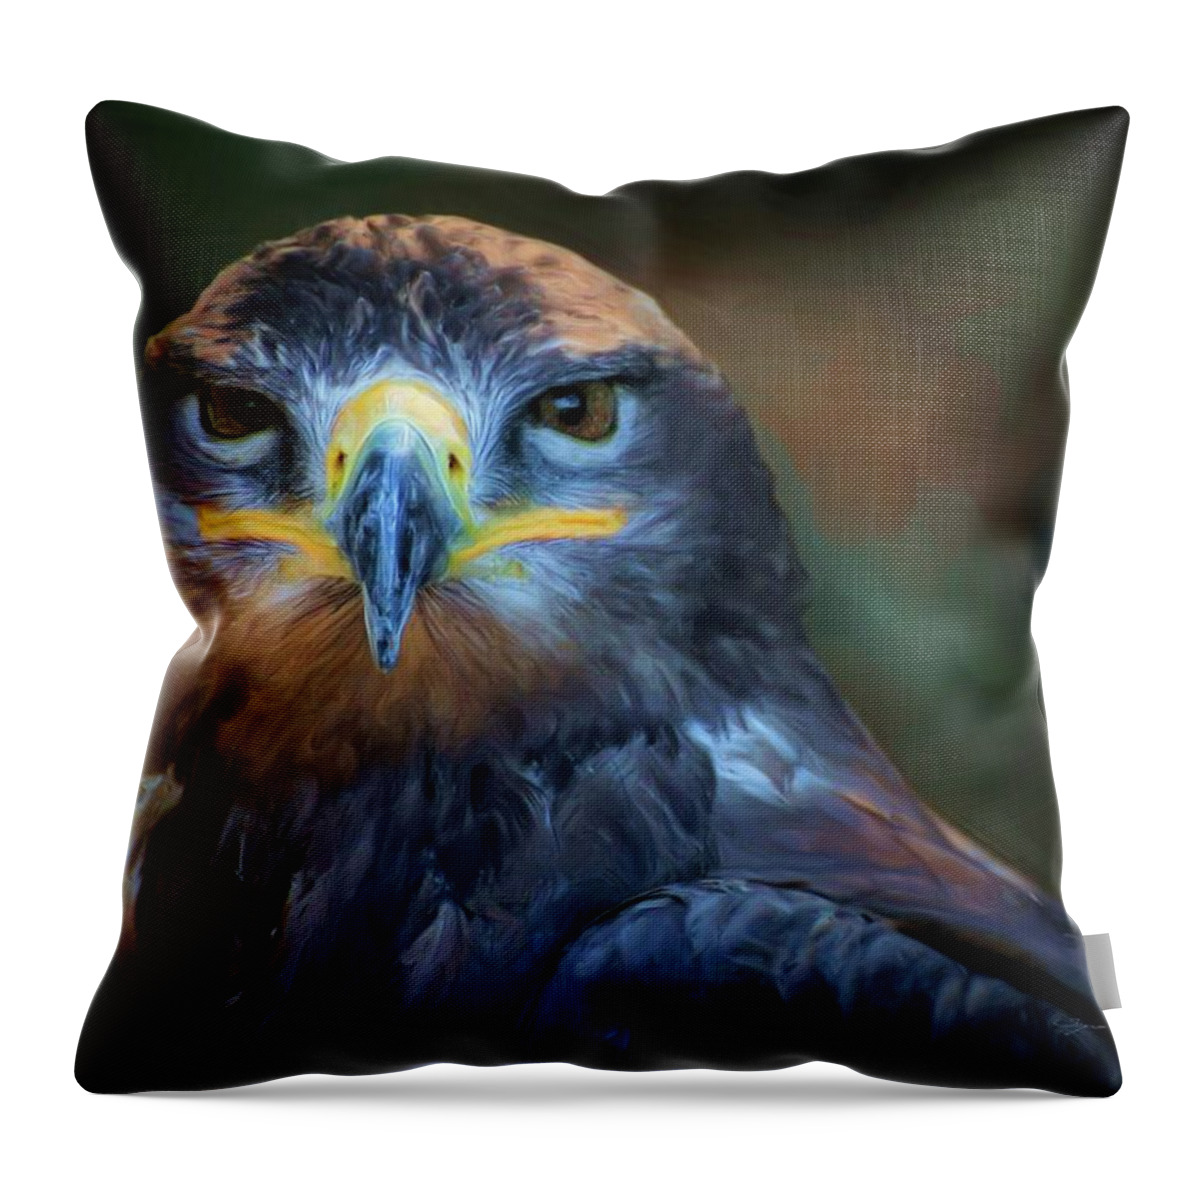 Wild Throw Pillow featuring the digital art Birds - Lord of sky by Sipo Liimatainen